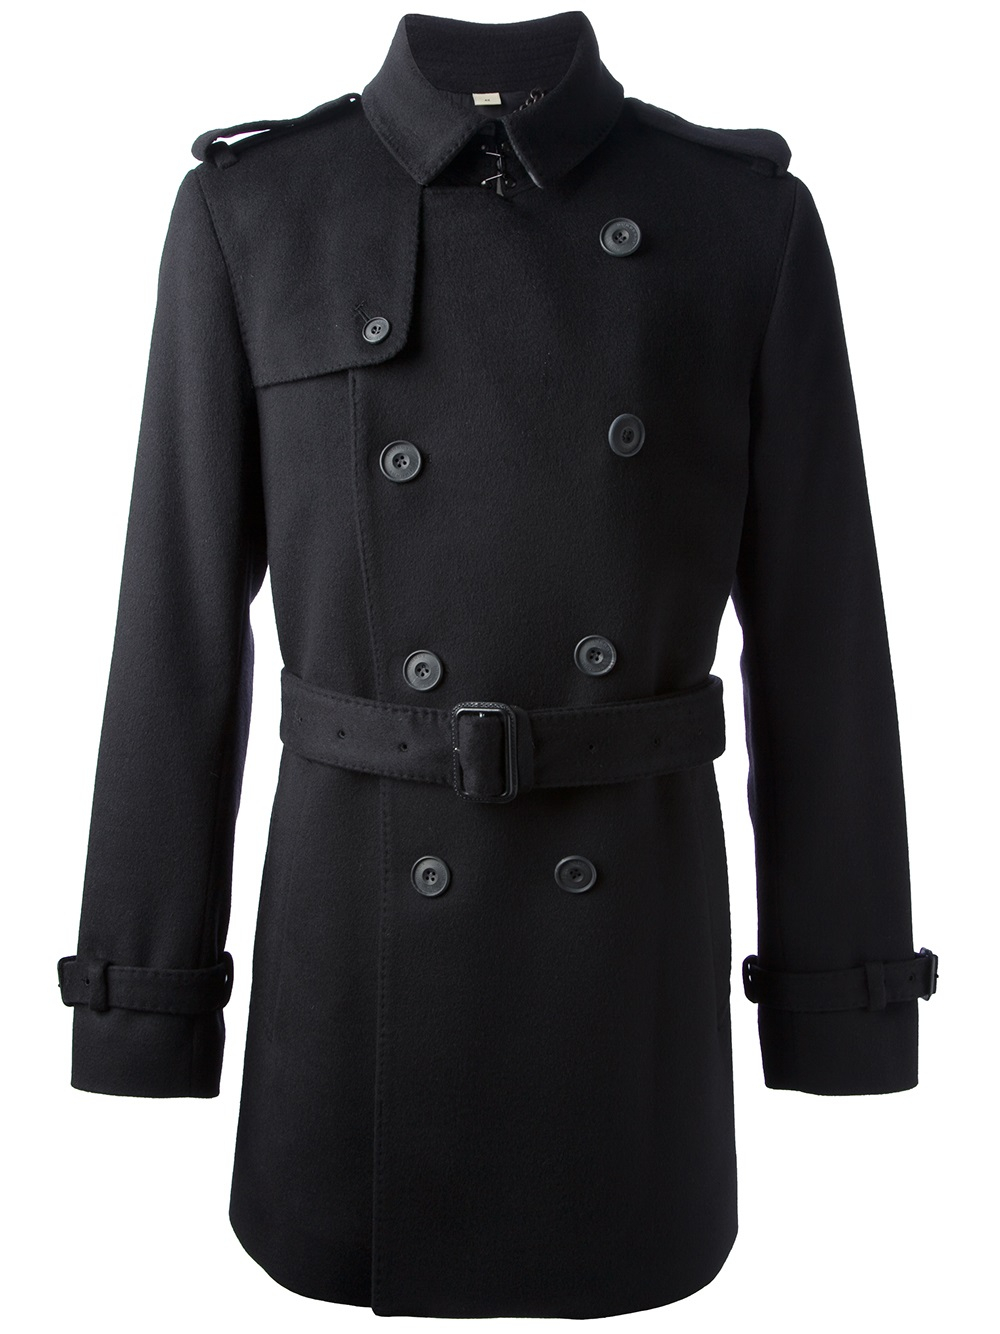 Burberry 'britton' Trench Coat in Black for Men | Lyst UK